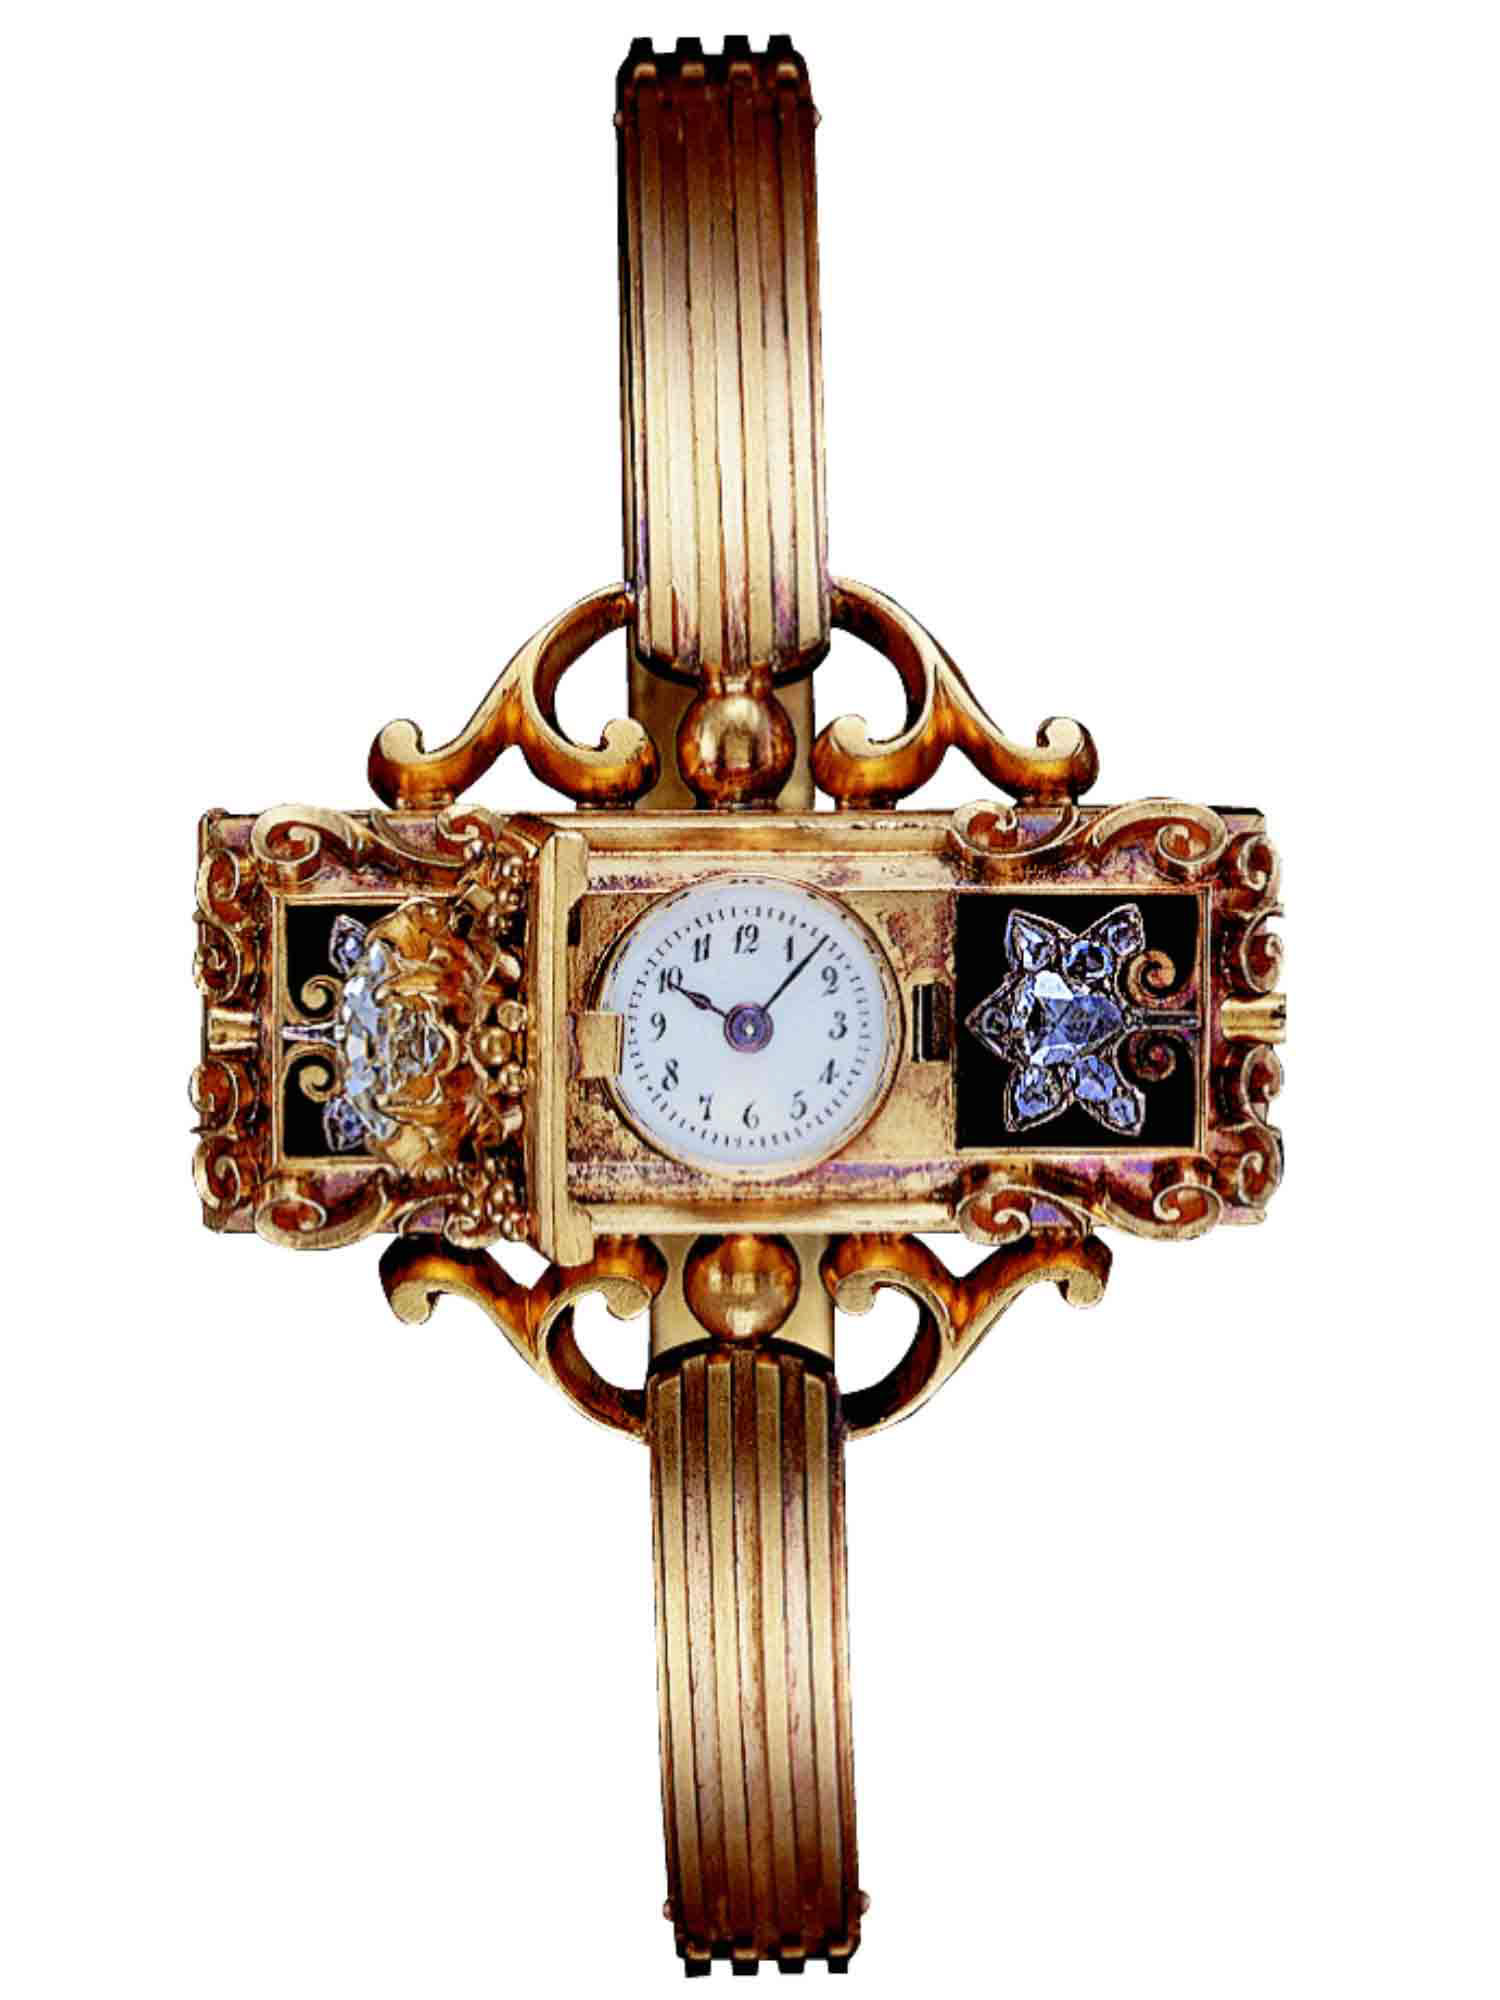 Patek Philippe developed their first wristwatch as early as 1868 for the Countess Koscowicz of Hungary. Both refined and practical for that time, the watch No. 27368 boasts a yellow gold hunter type case, hinged back. and was enhanced with enamel in black and rose-cut diamond setting.